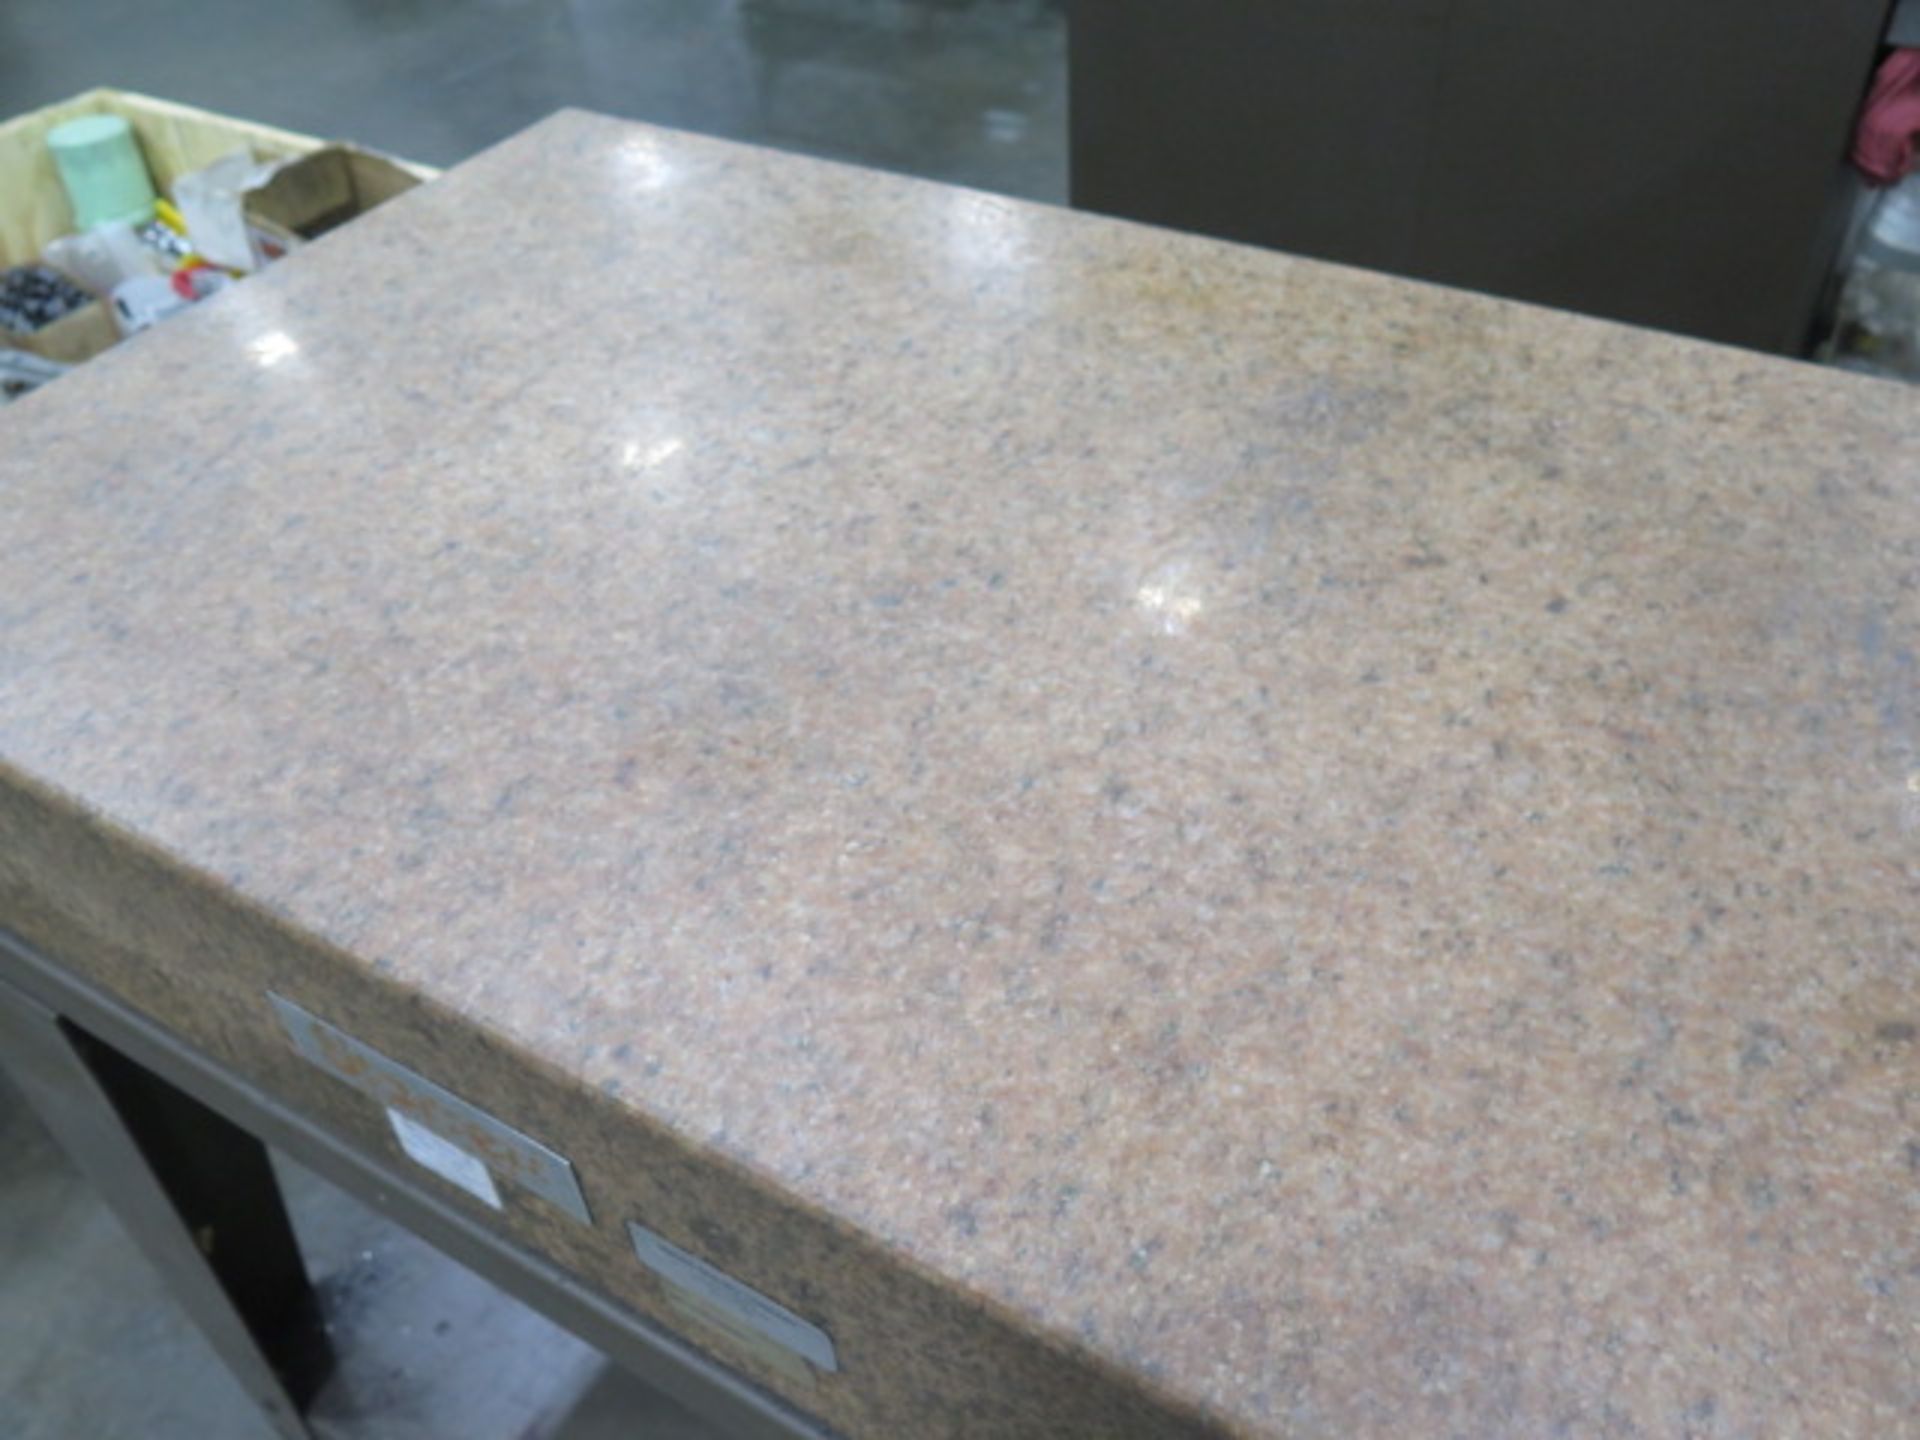 Starrett Crystal Pink 36” x 48” x 6” Granite Surface Plate w/ Stand (SOLD AS-IS - NO WARRANTY) - Image 4 of 5